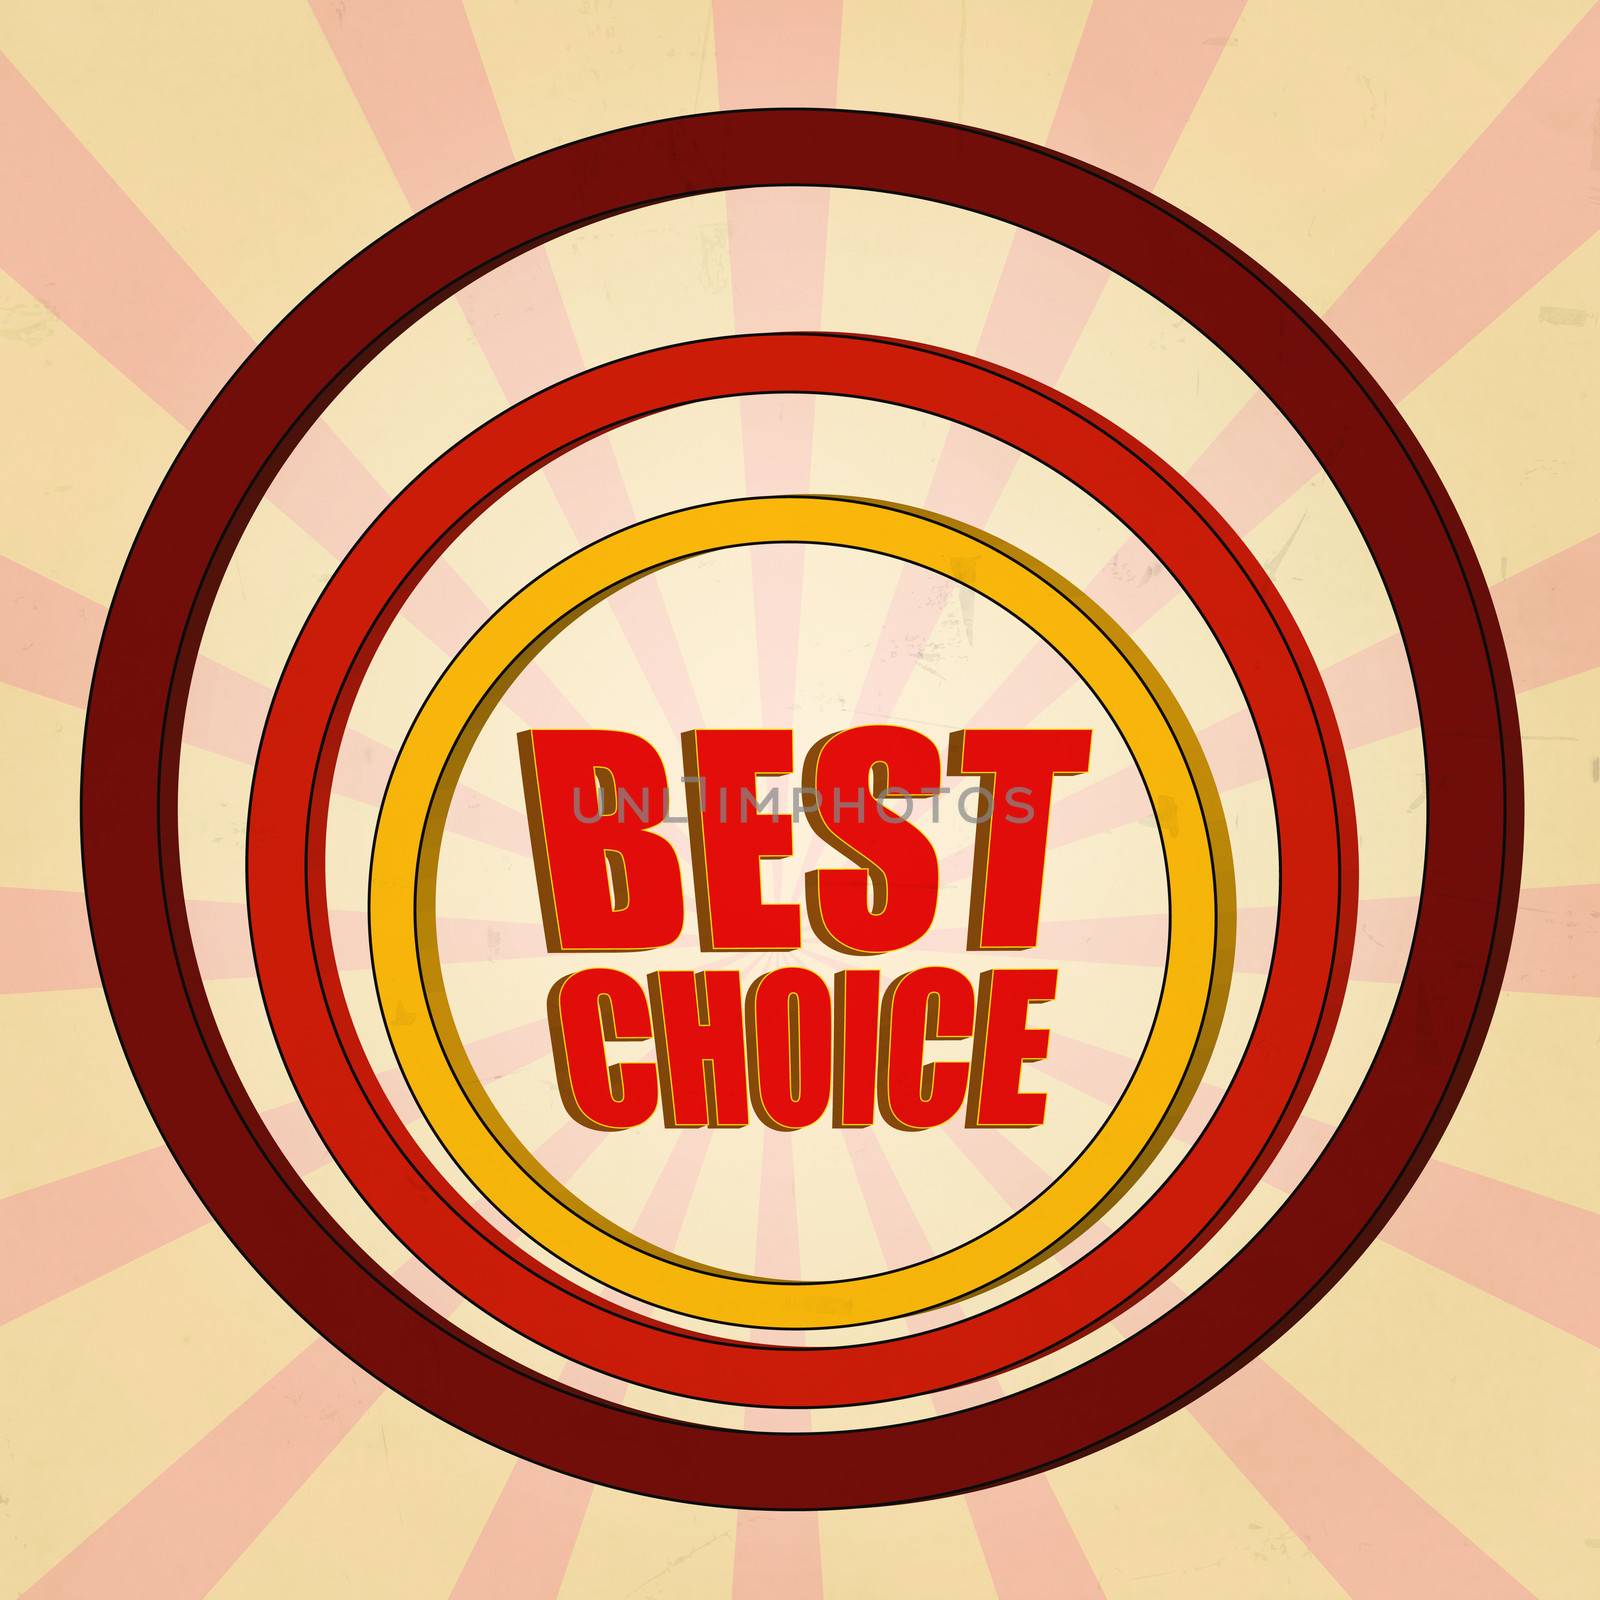 best choice red 3d text and circles